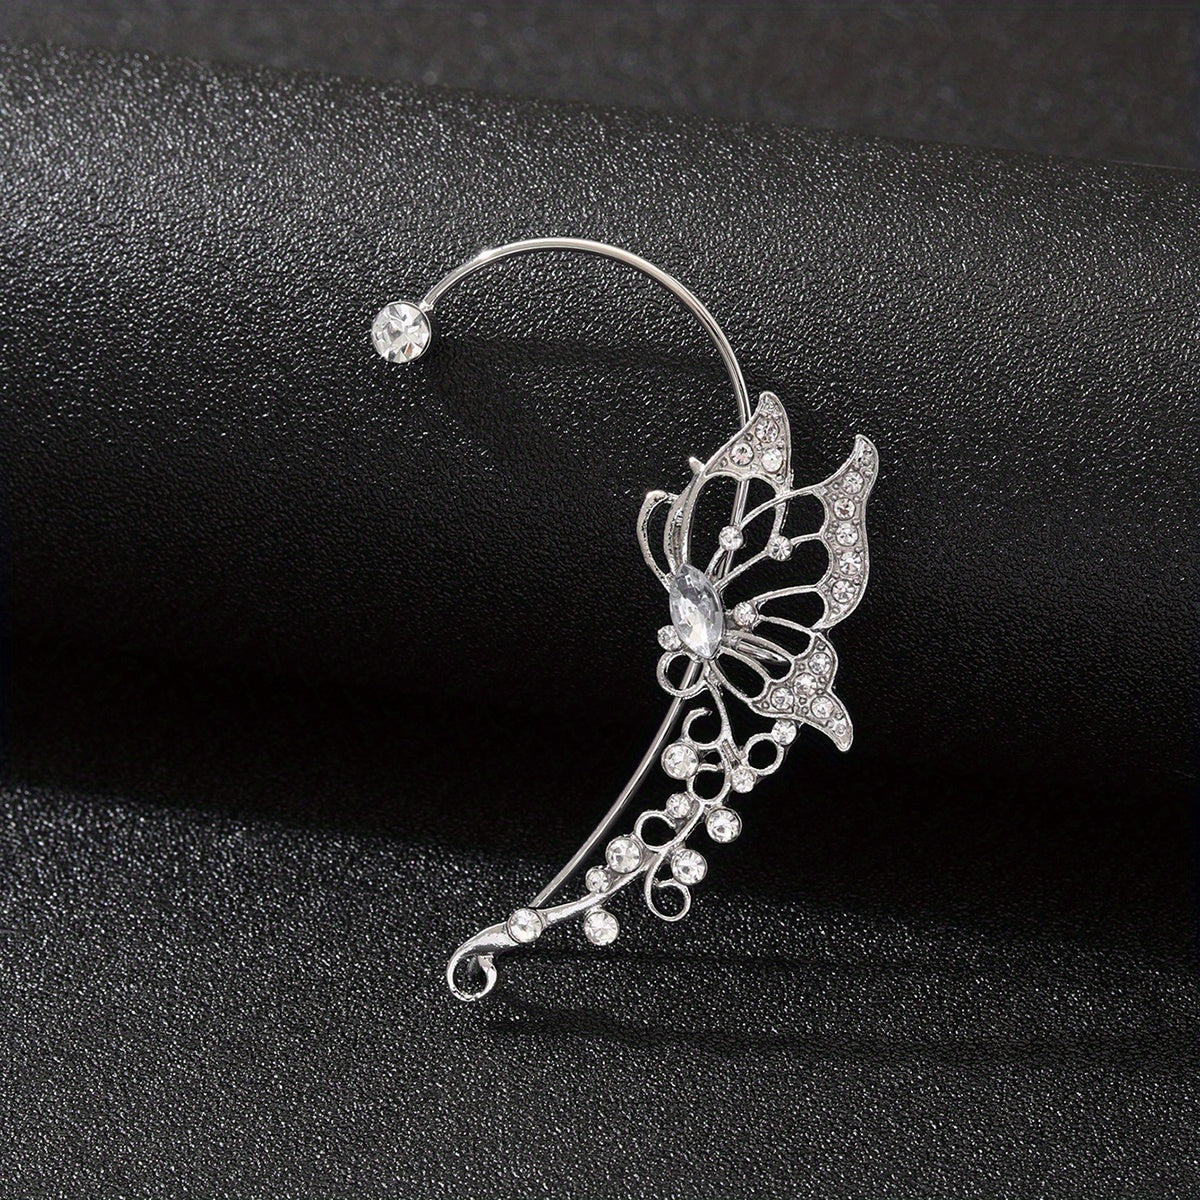 Upgrade Your Style with our Ladies Fashion Zicron Butterfly Earrings - No Piercing Required!